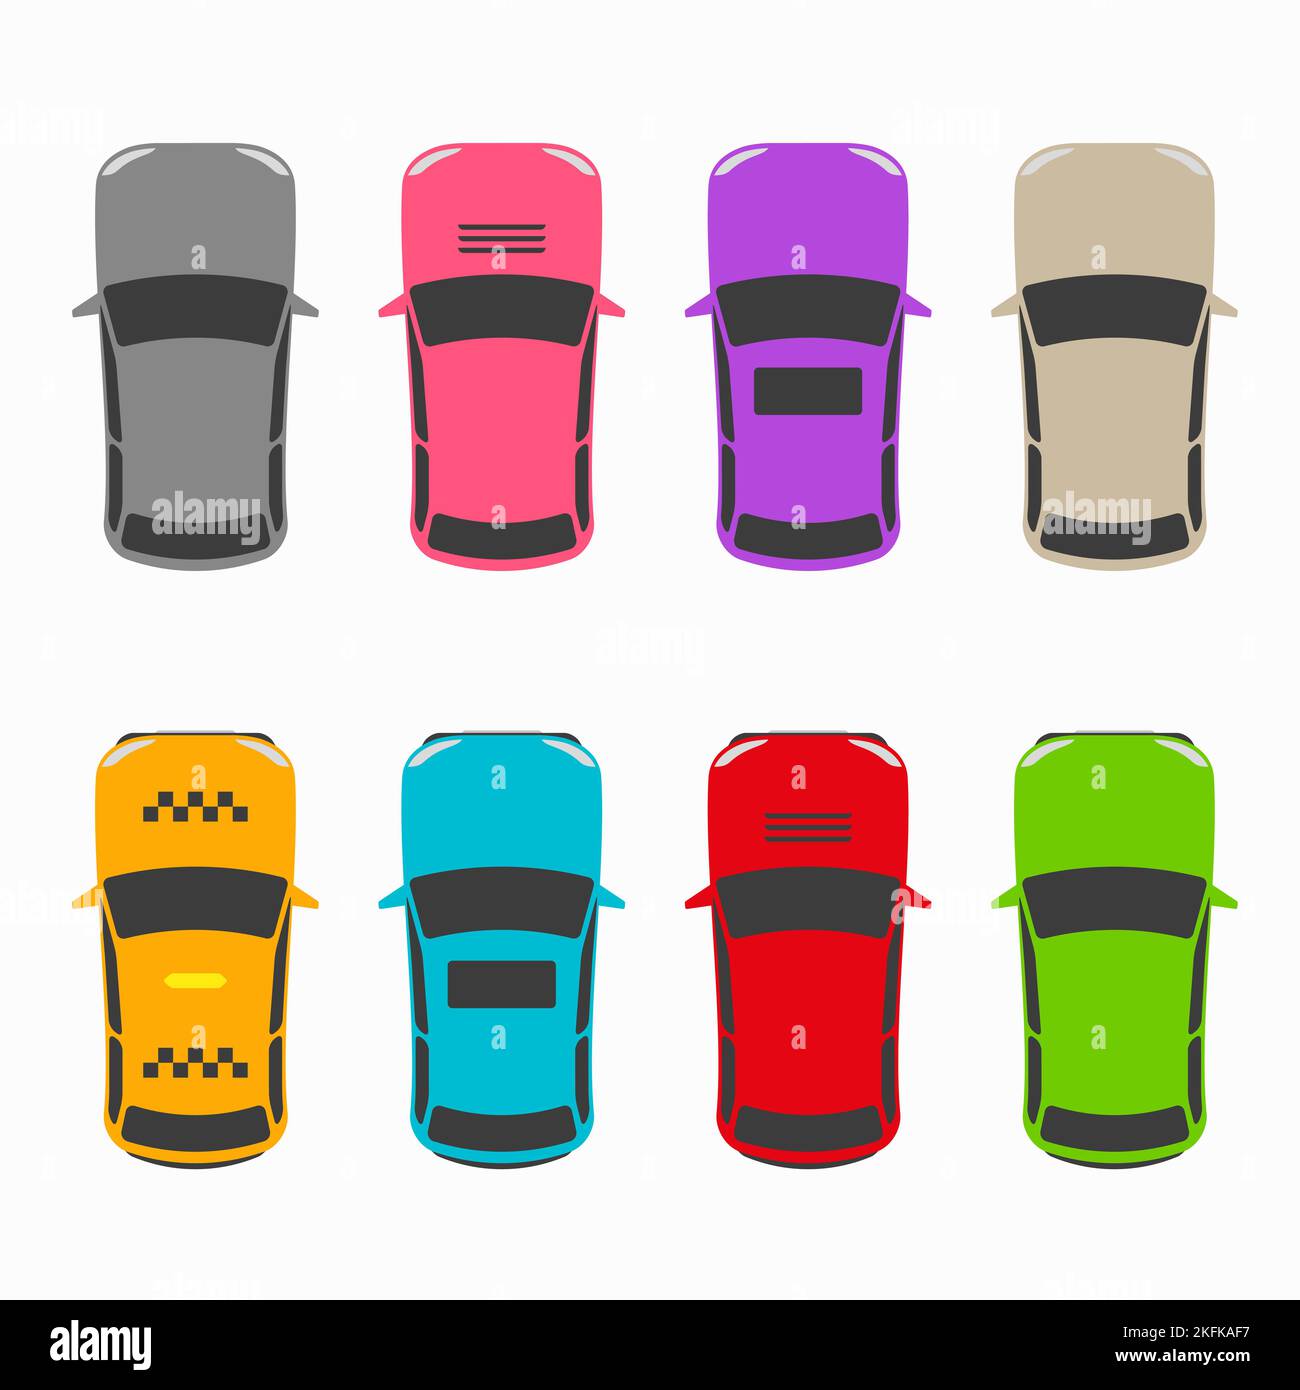 Hatchback passenger cars top view silhouette icon set. Flat illustration isolated on white background. Stock Photo